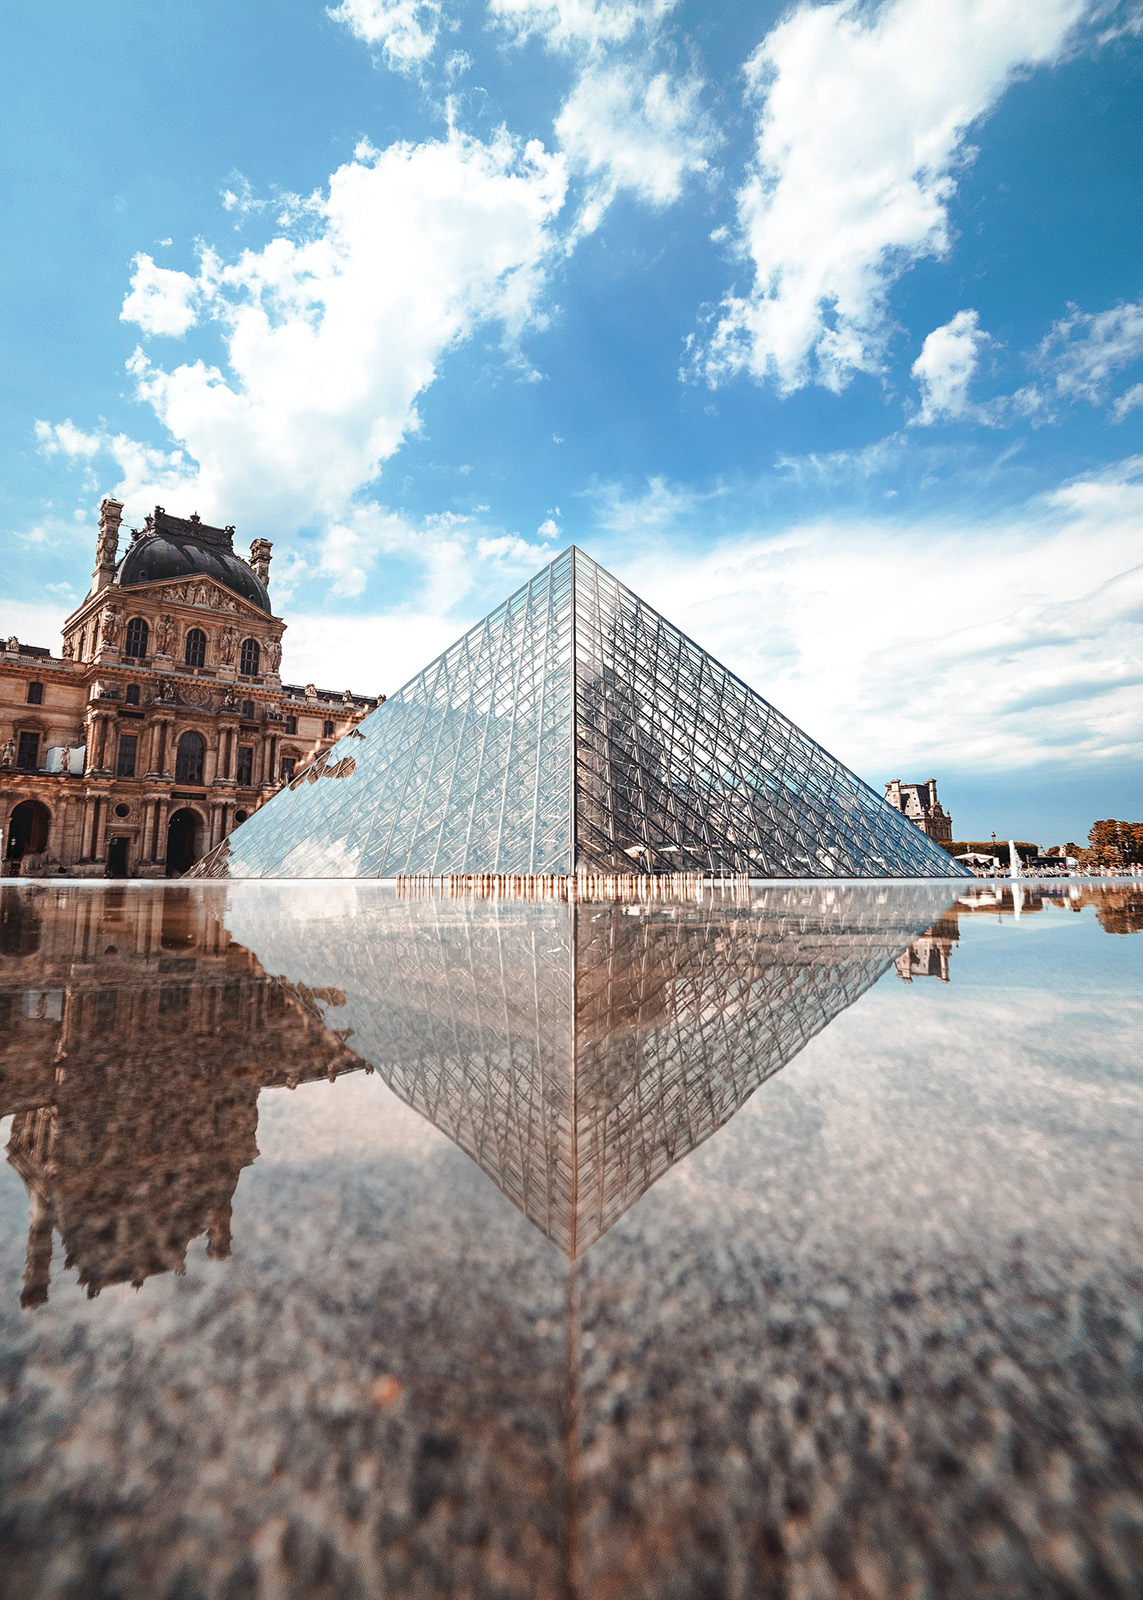 Glass pyramid outside the Louvre Museum, Paris